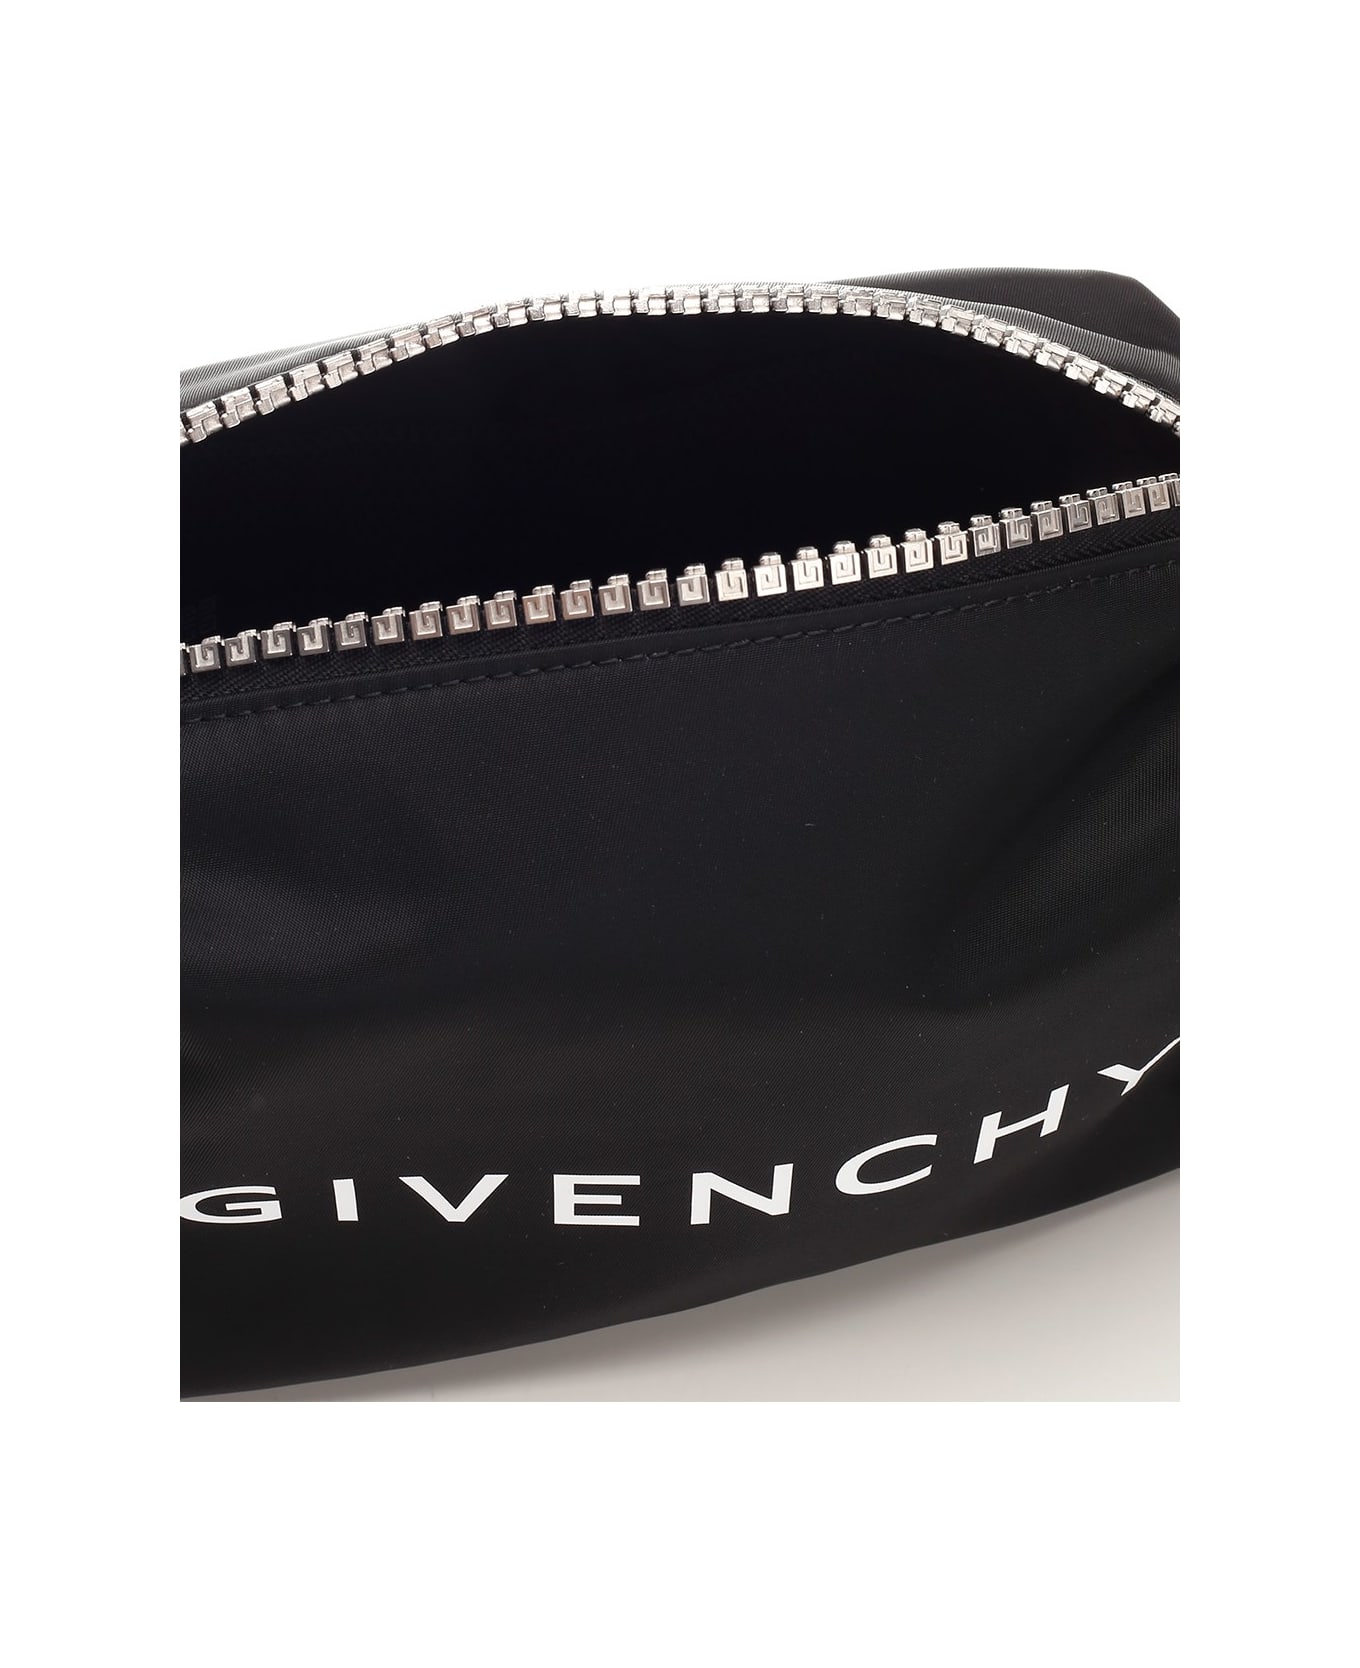 Givenchy G-zip Toilet Pouch - Black